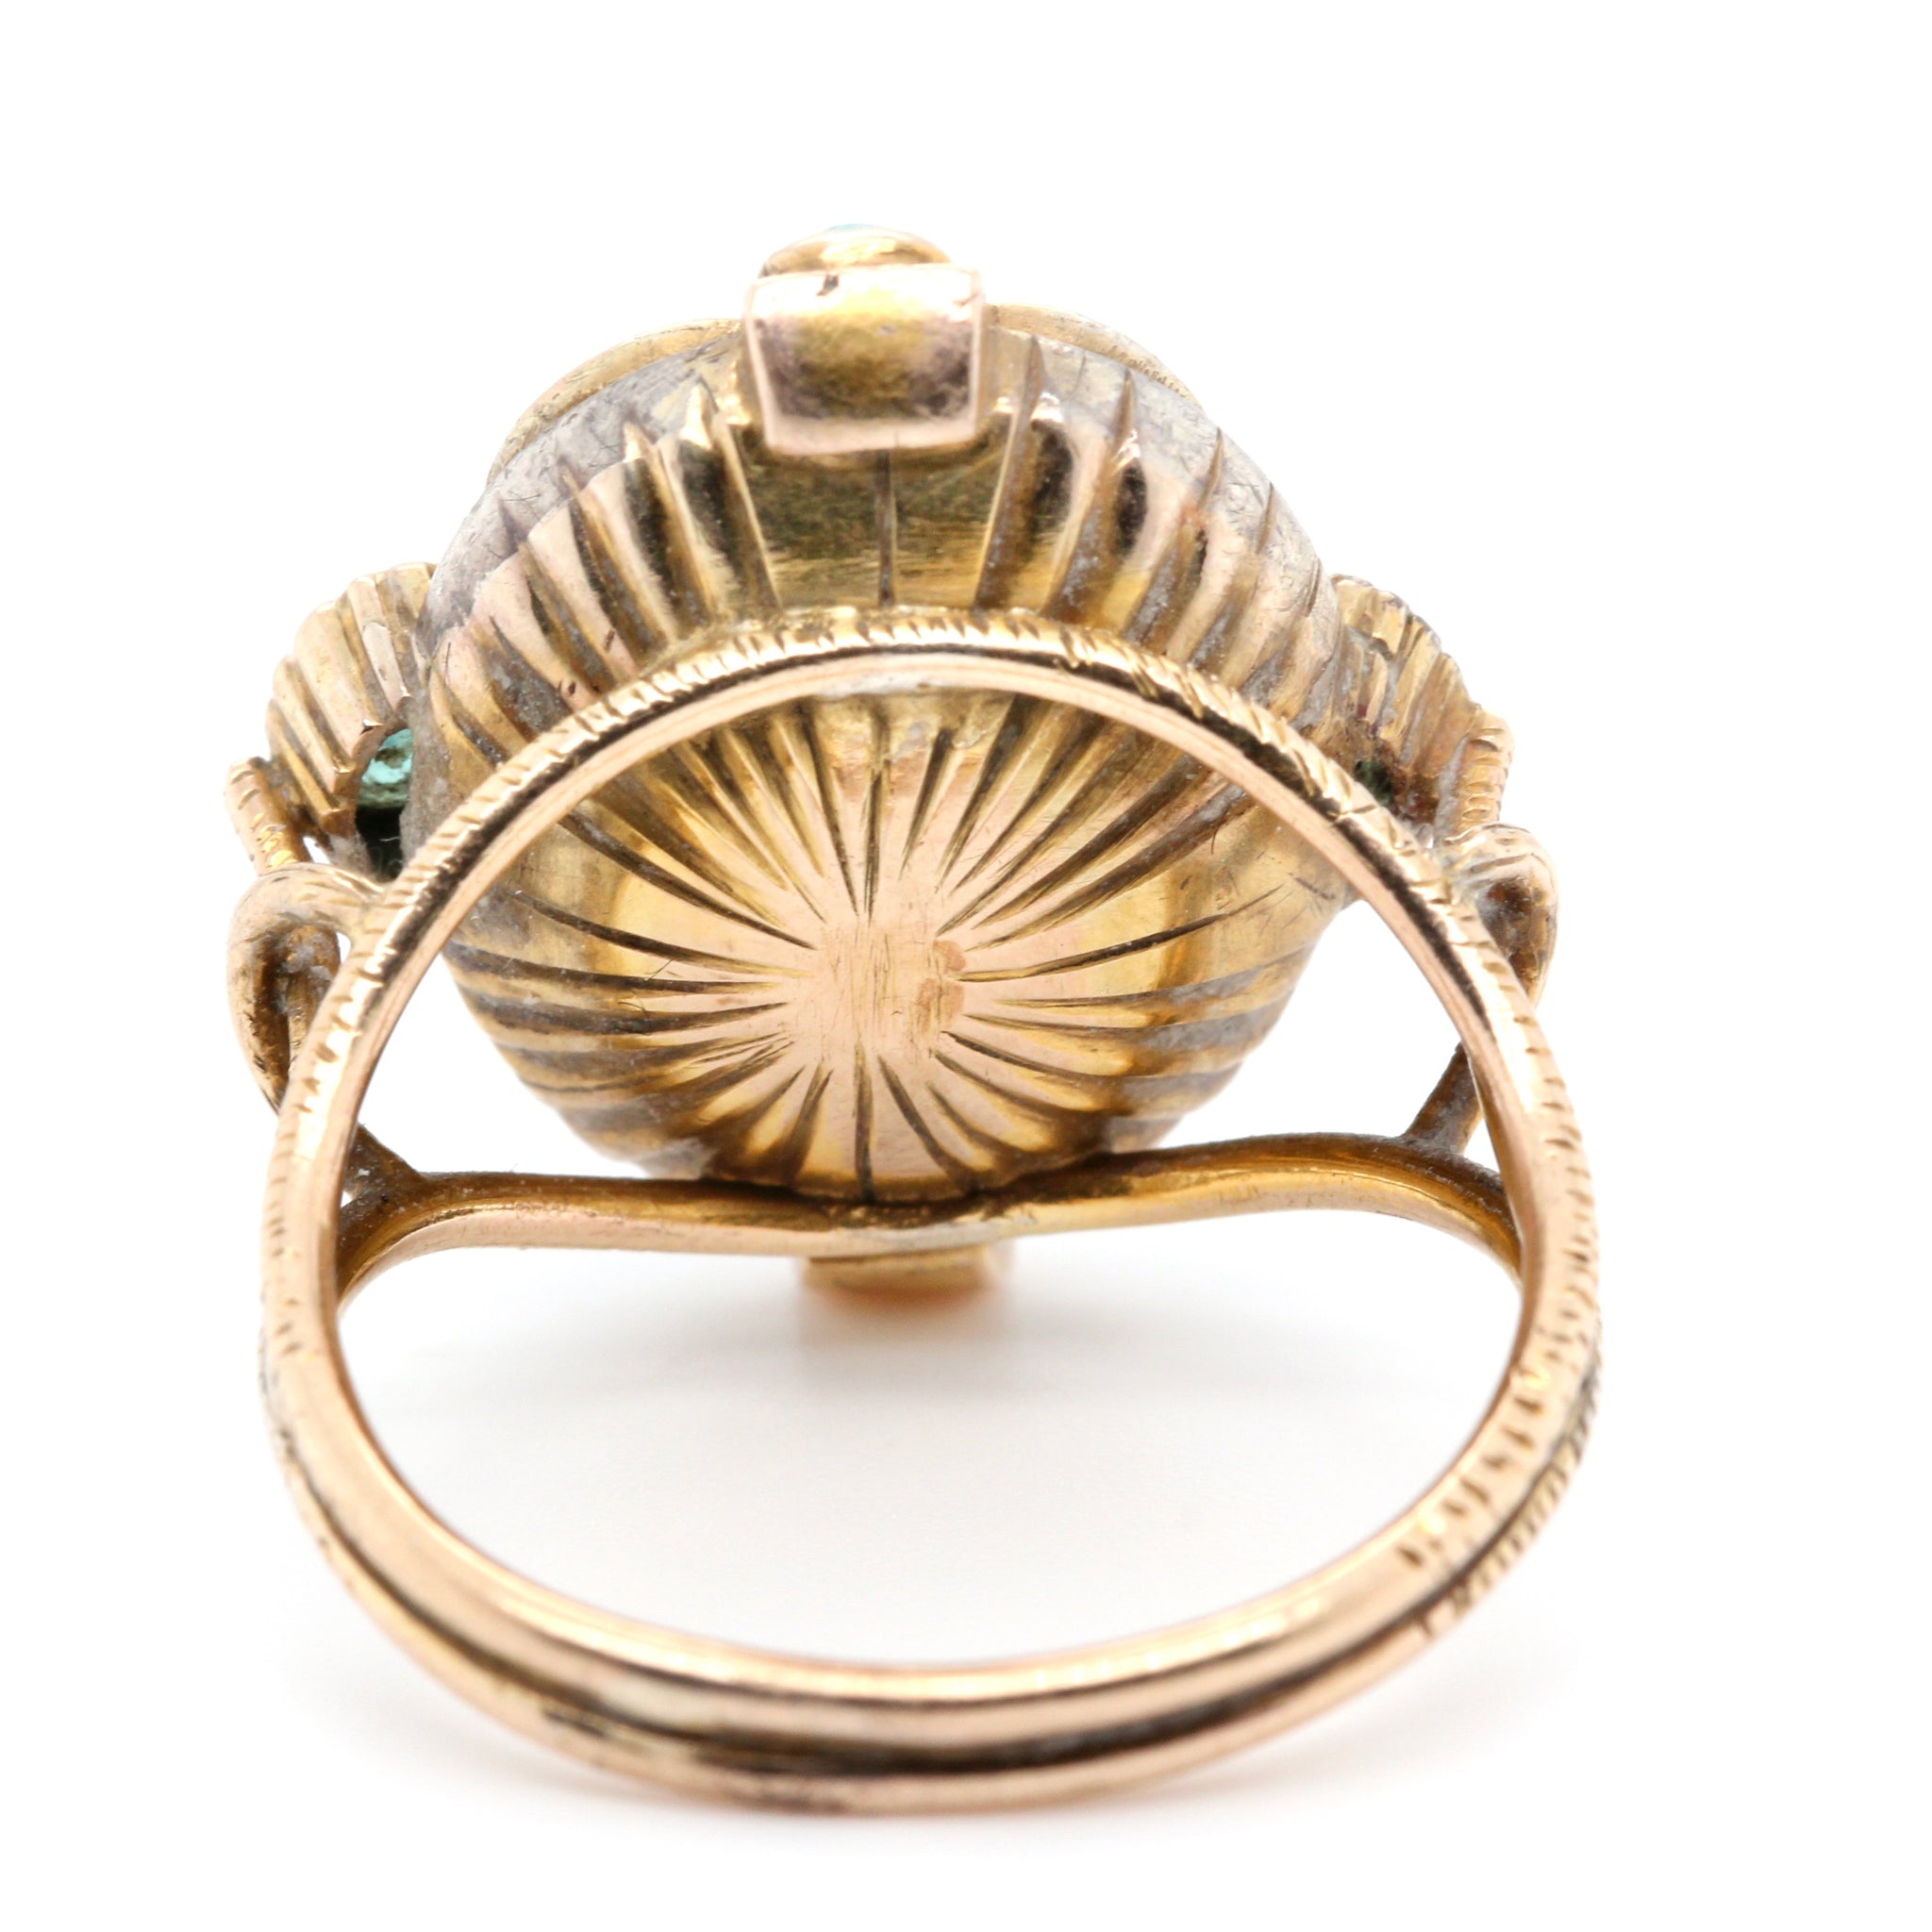 Victorian Arts and Crafts Ring